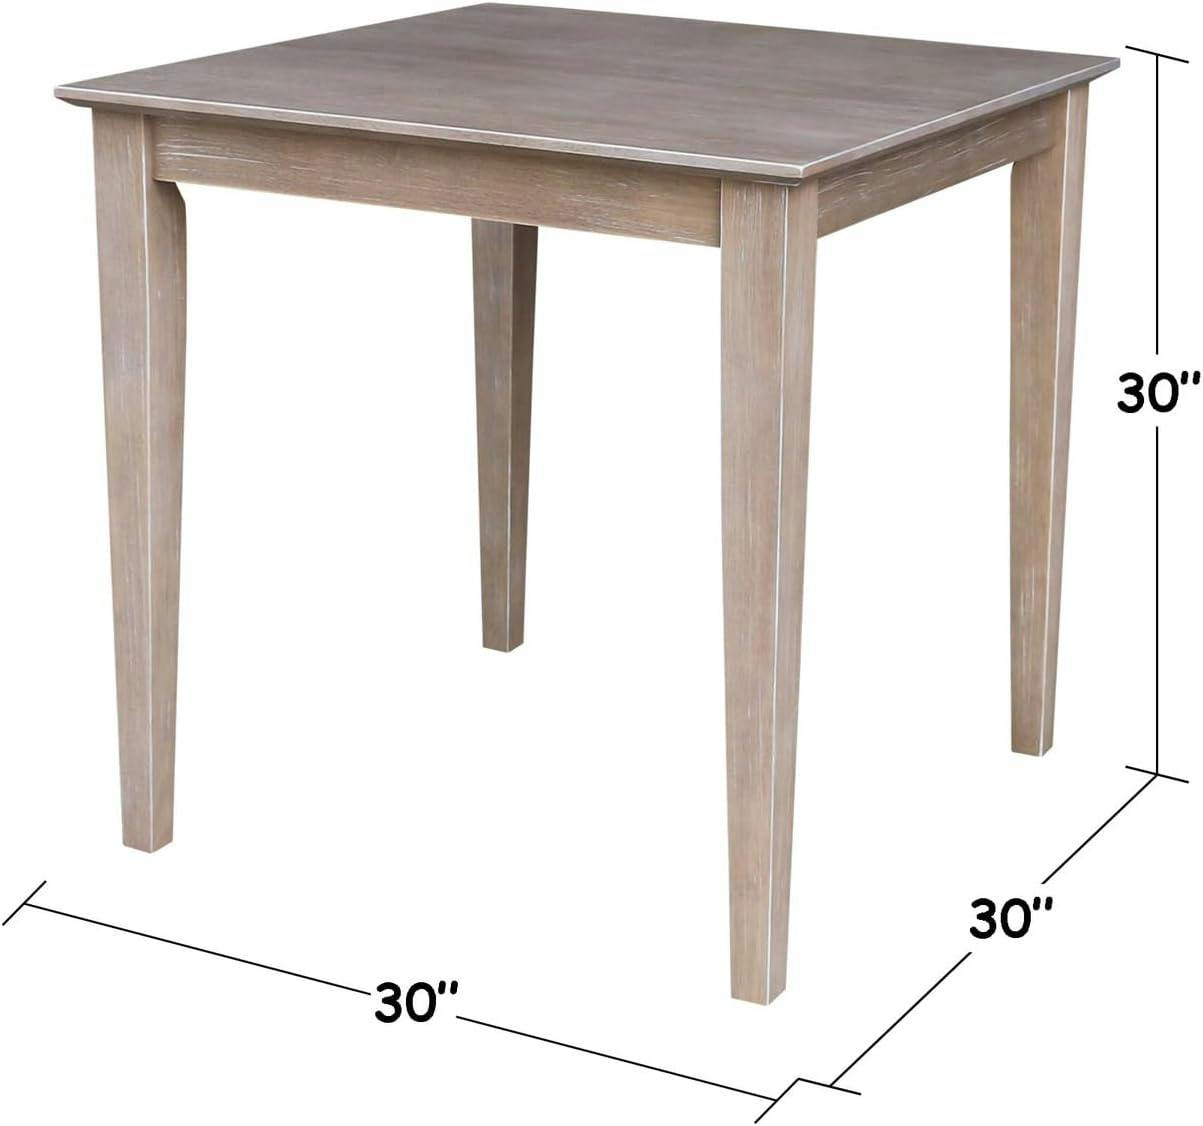 Transitional Solid Wood 30" Square Dining Table in Washed Gray